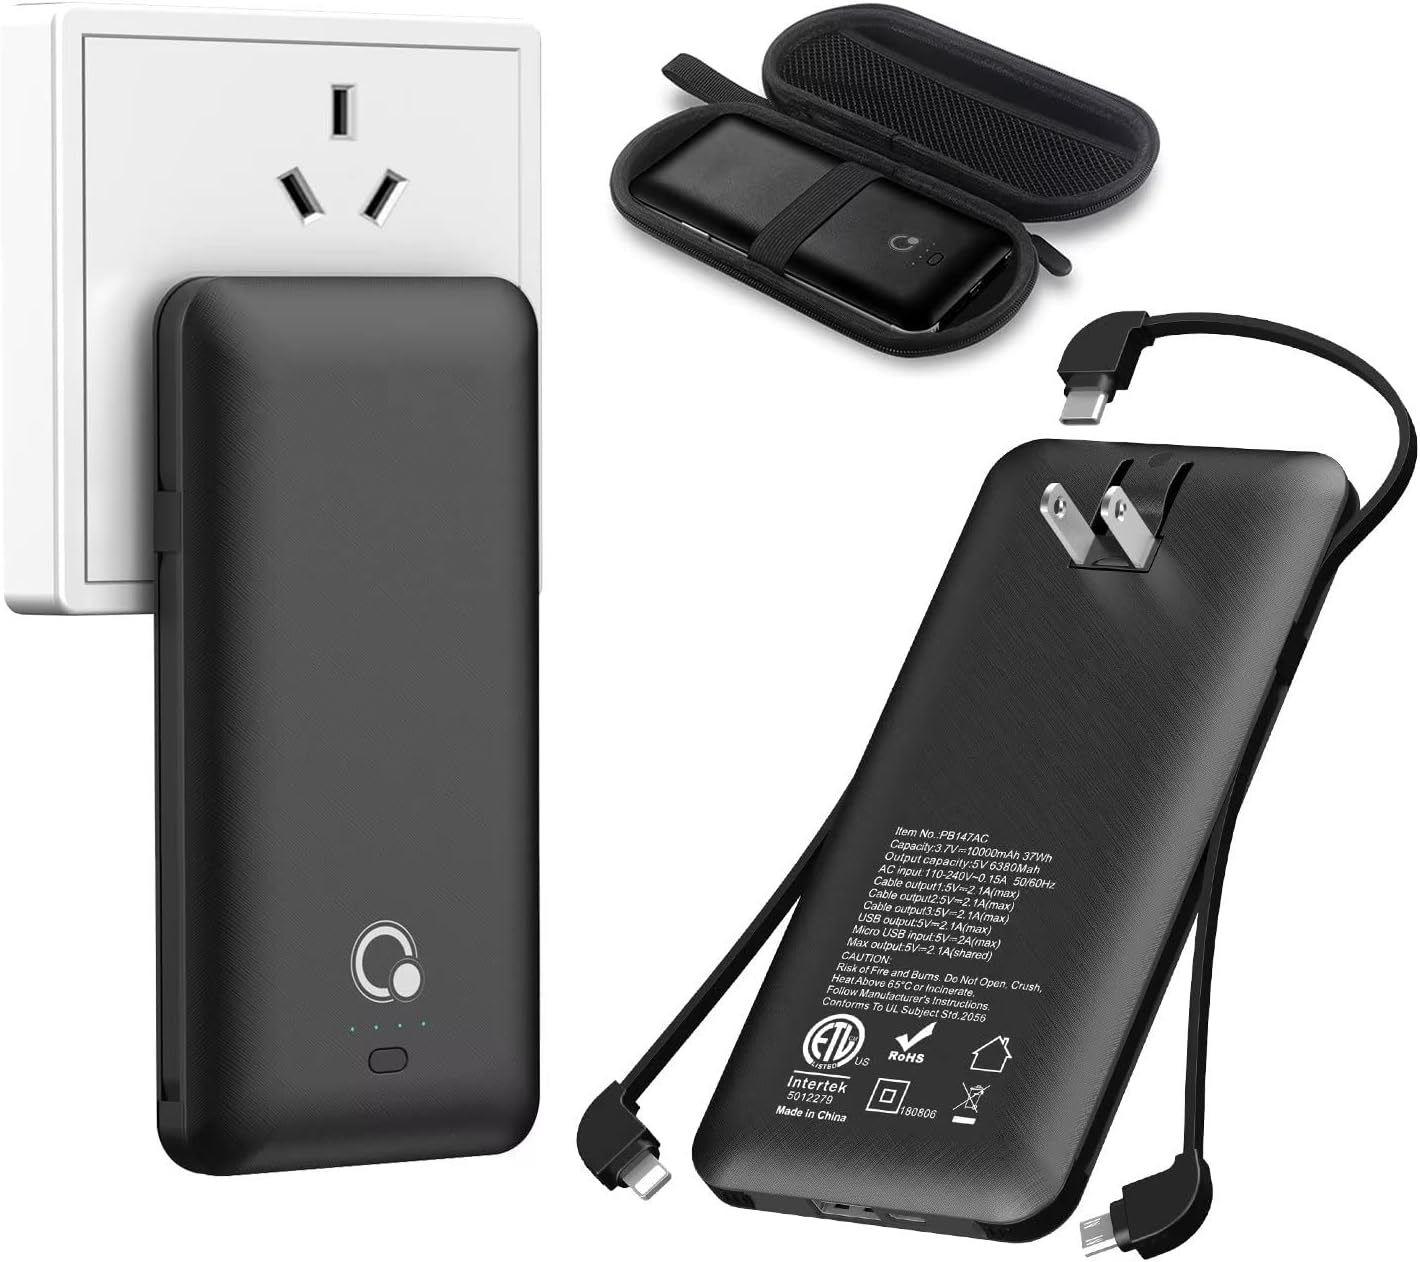 Portable Power Bank Phone Charger